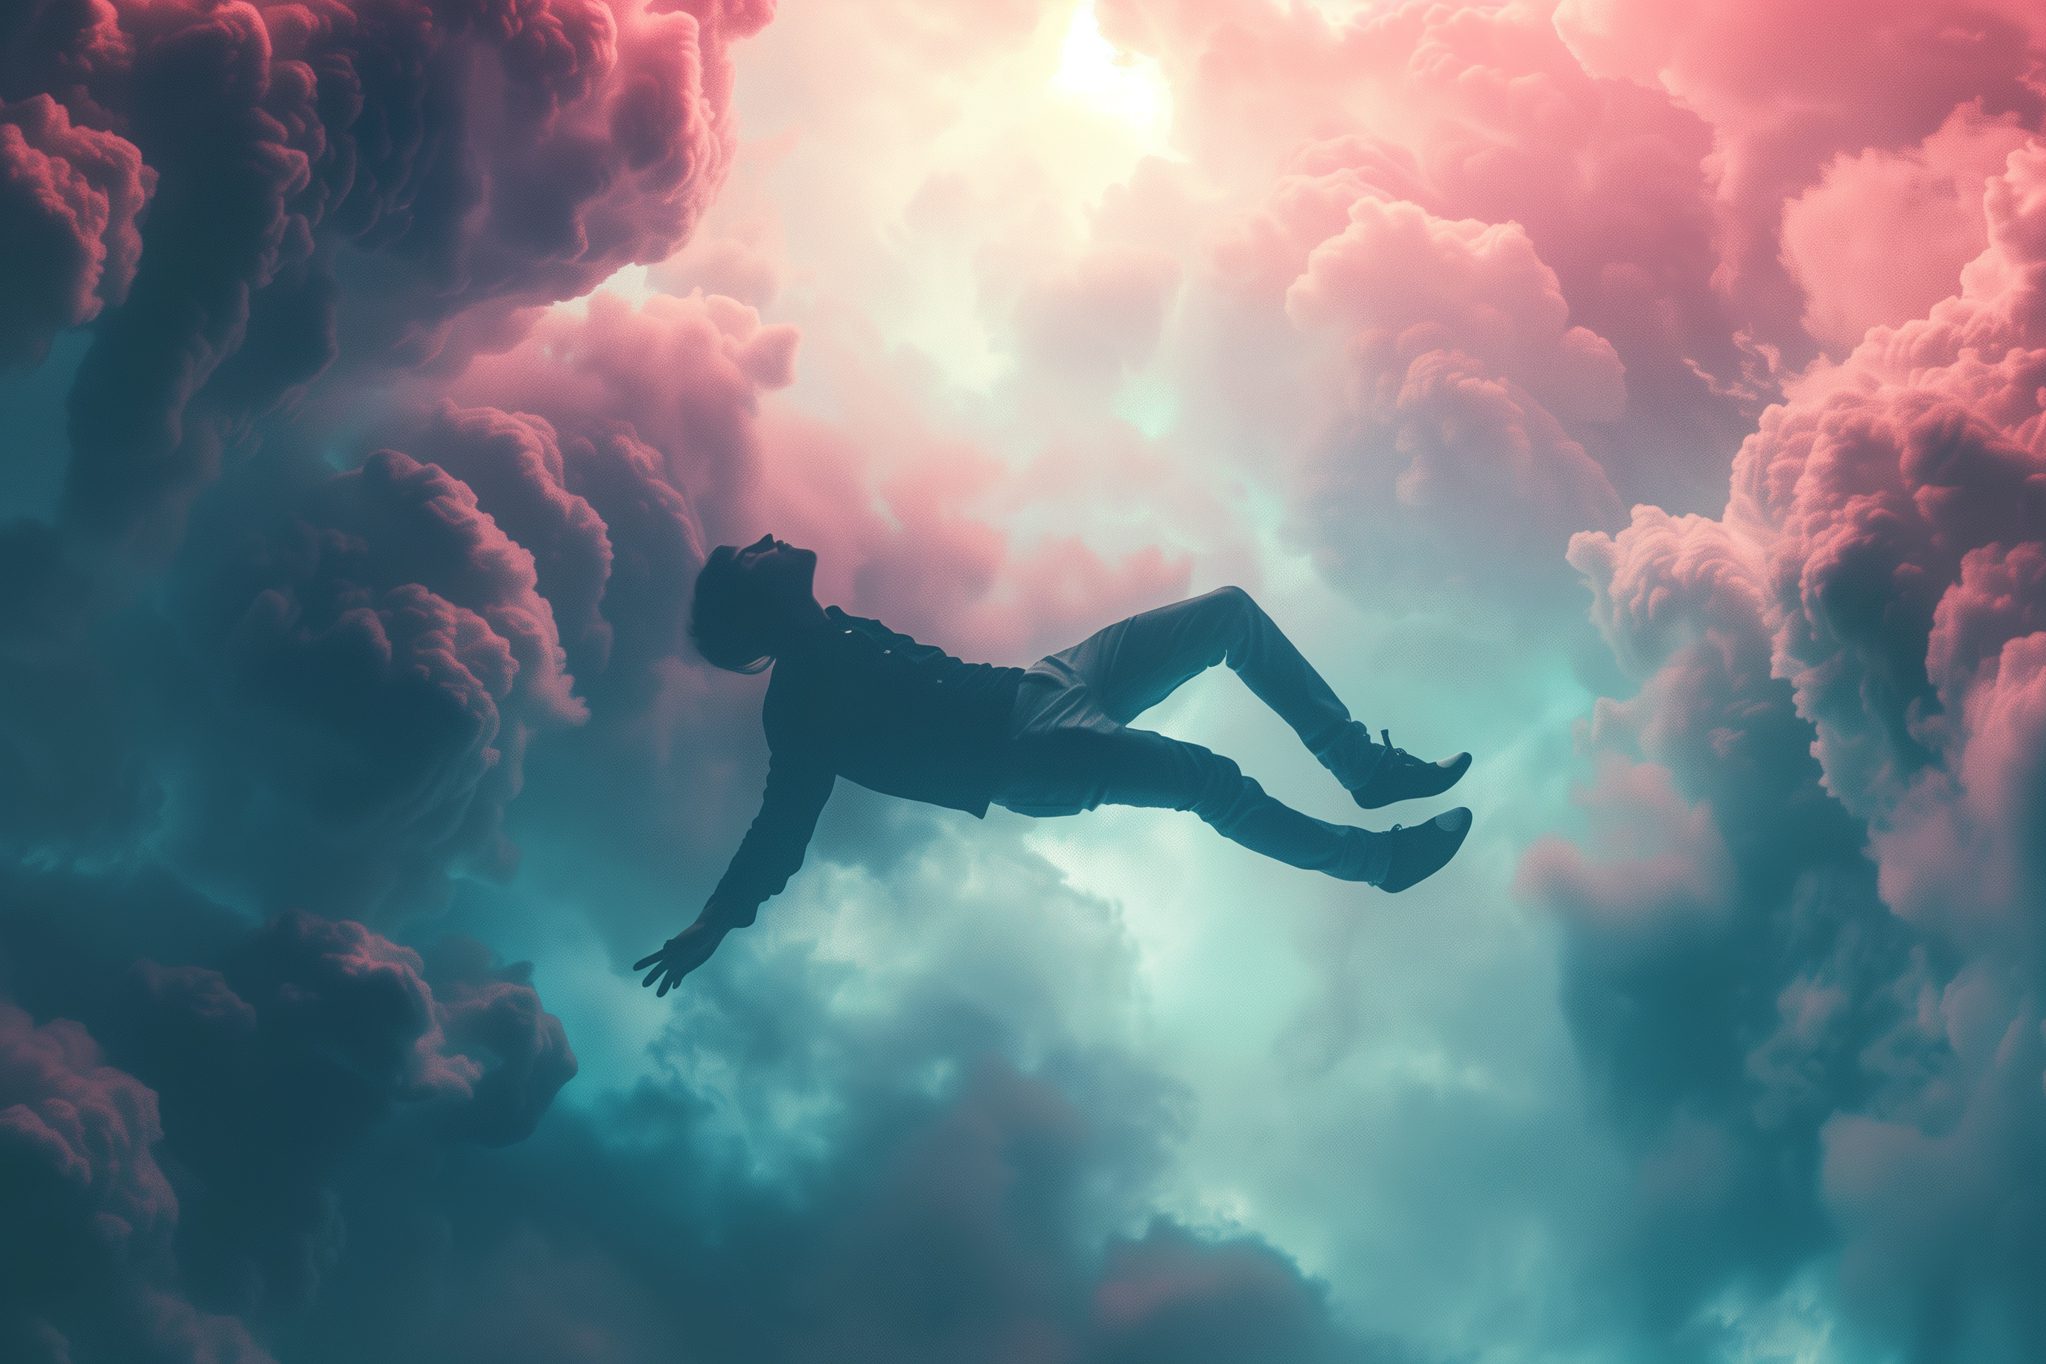 Recurring Dreams: Why We Experience the Same Dreams Over and Over?